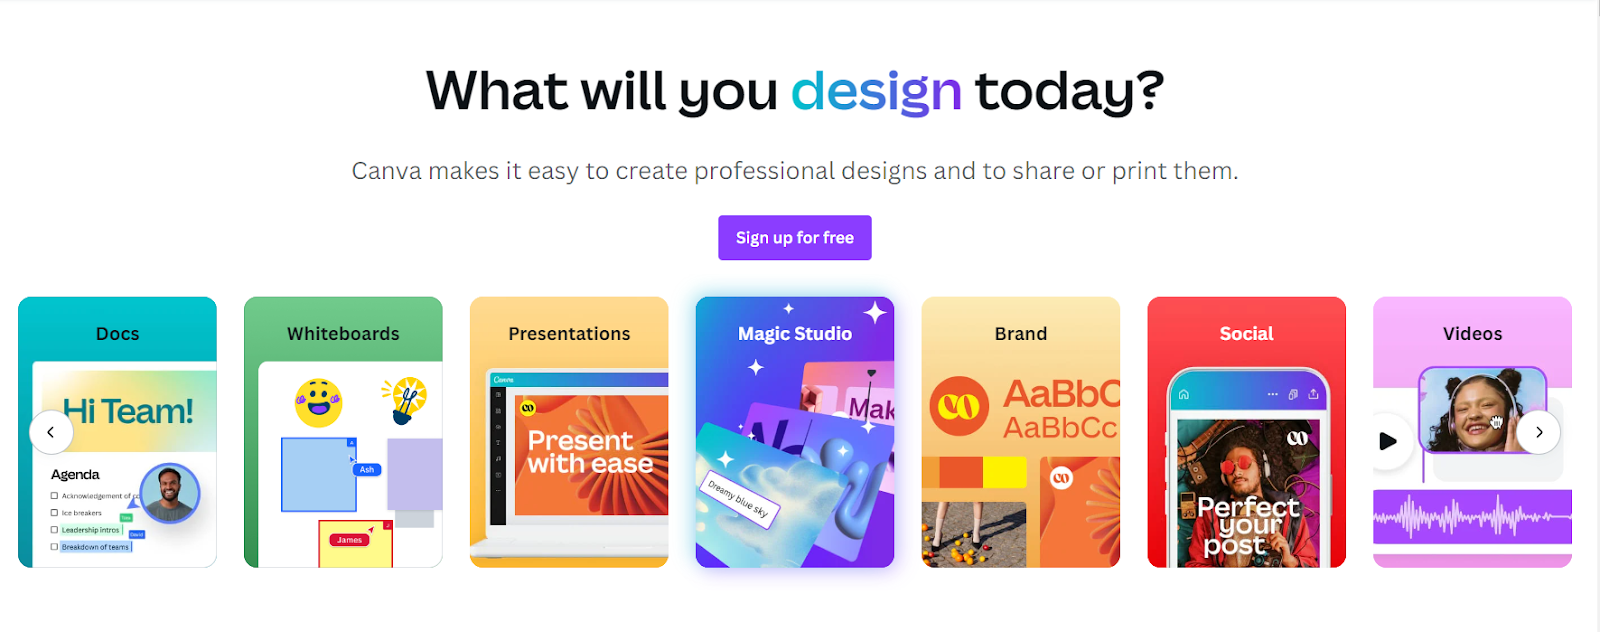 Canva's "What will you design today?" landing page